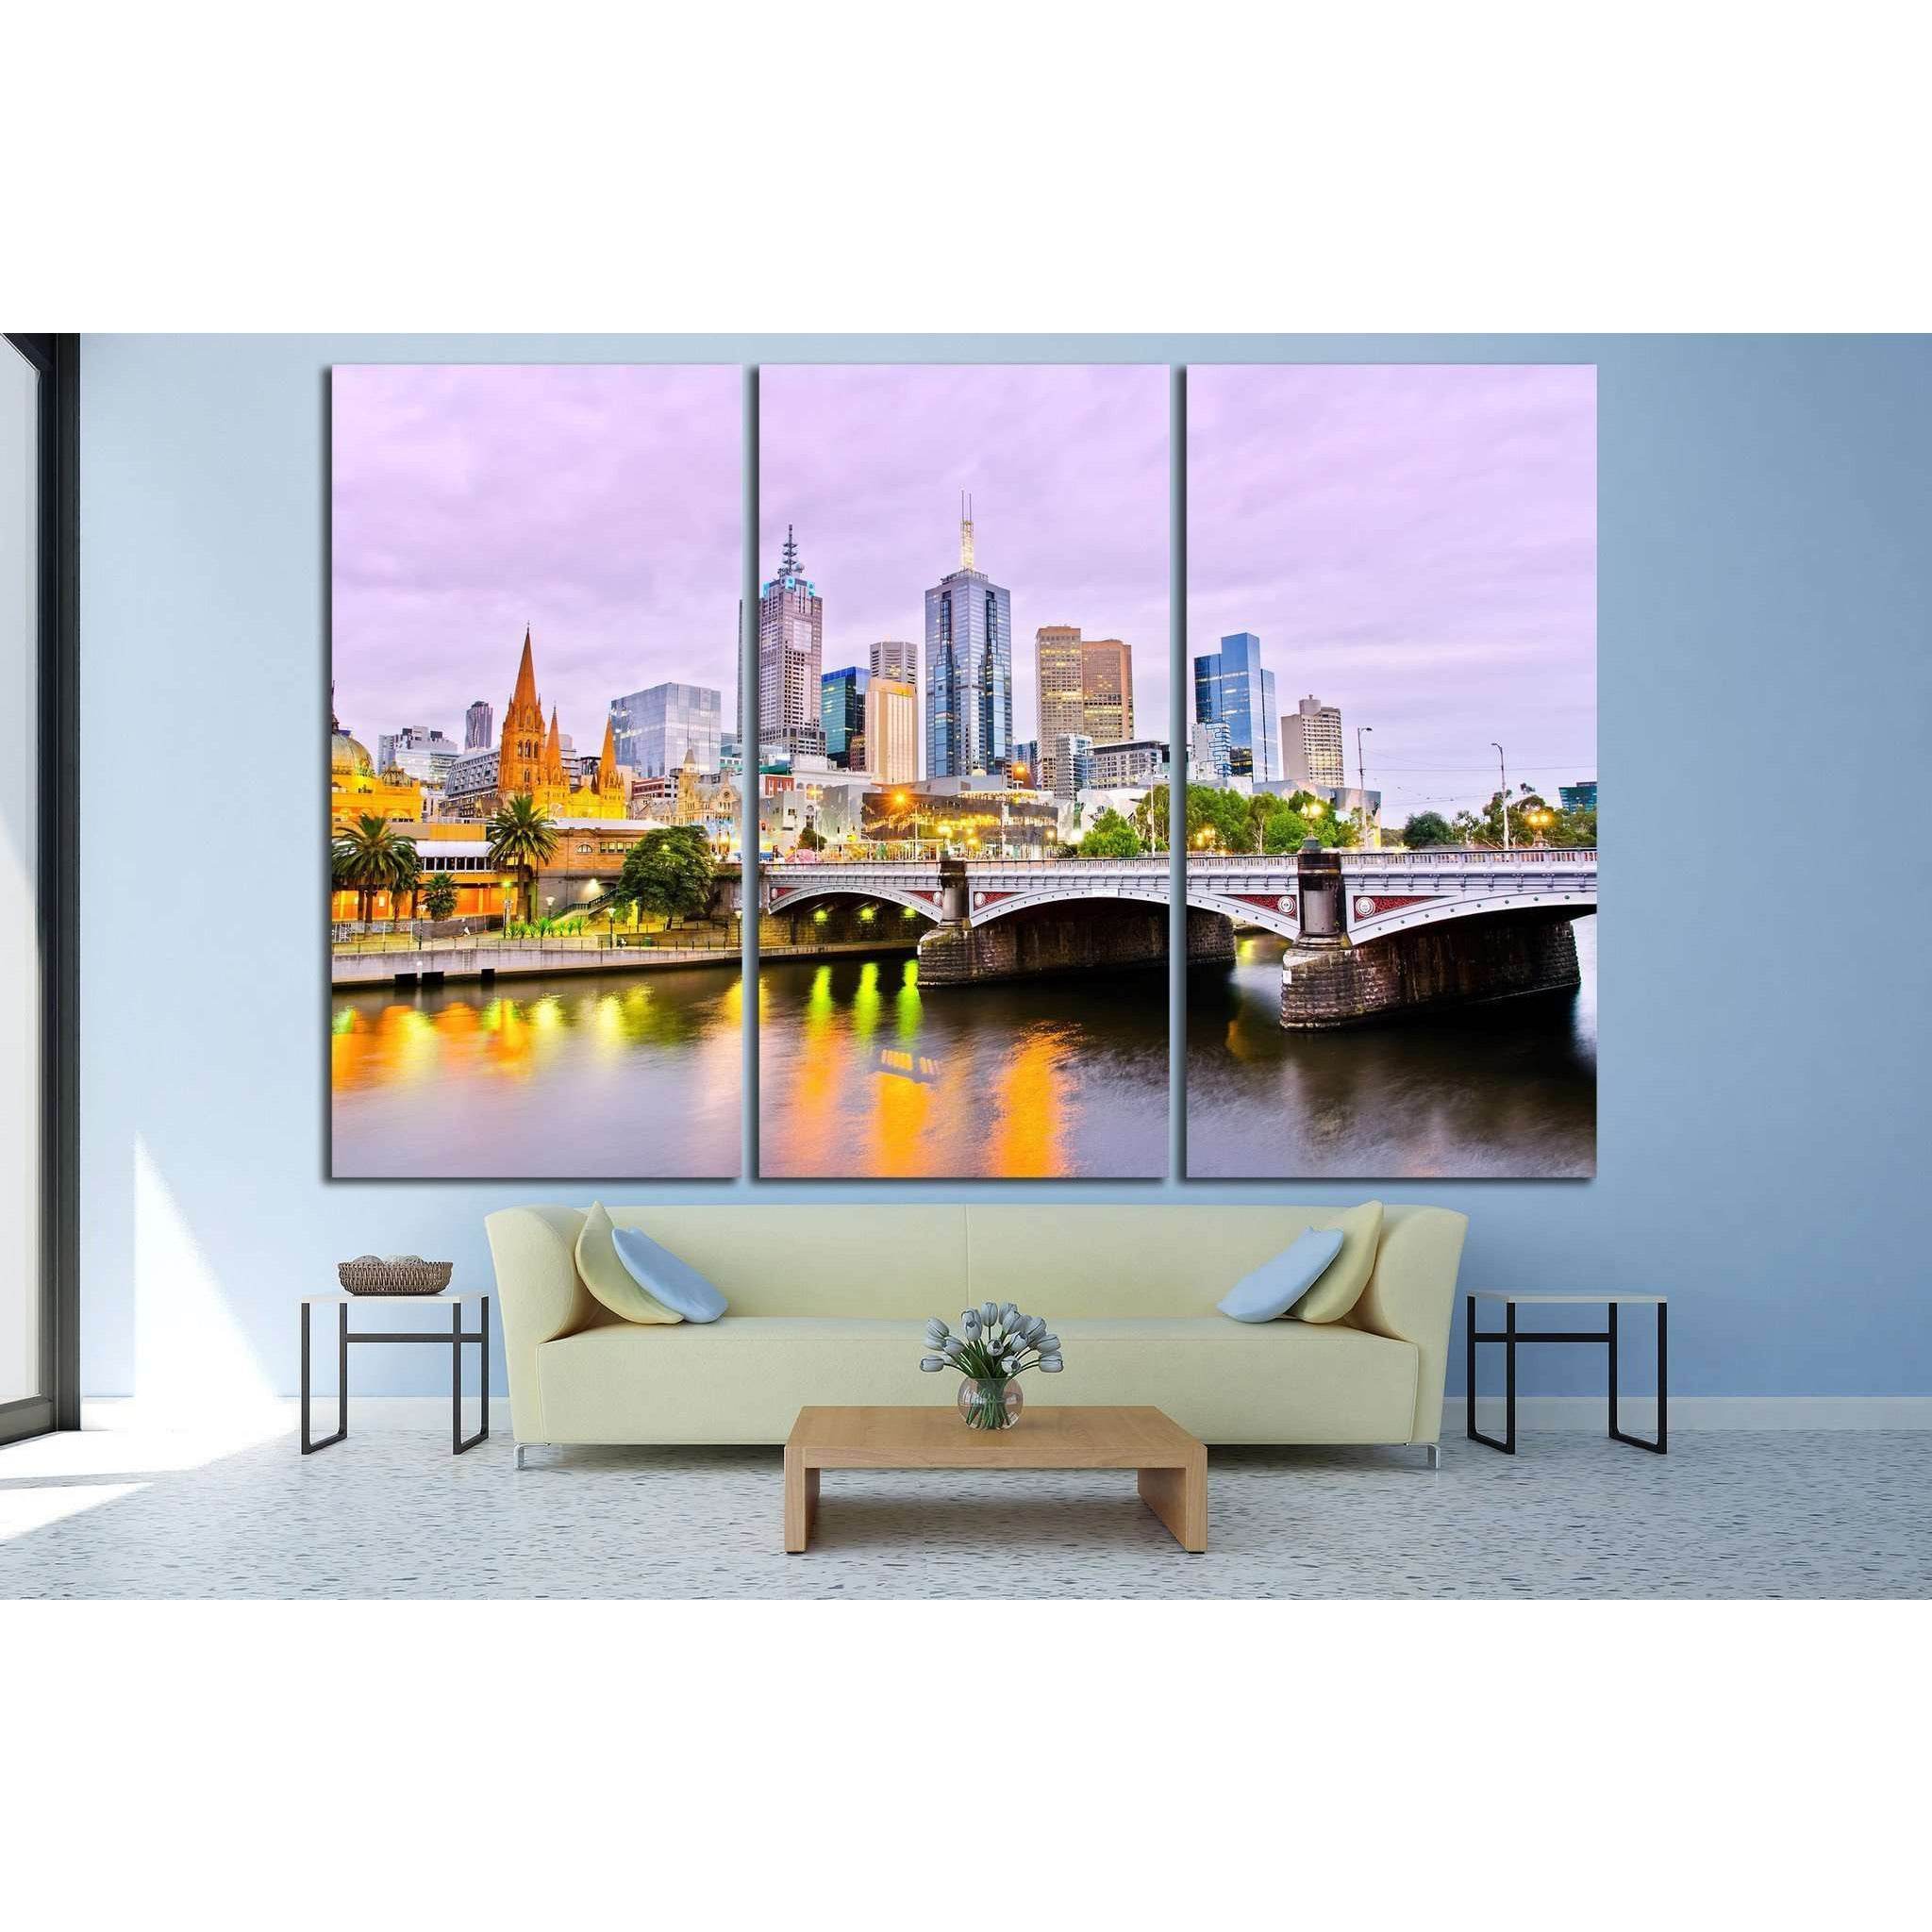 View of Melbourne №804 Ready to Hang Canvas Print